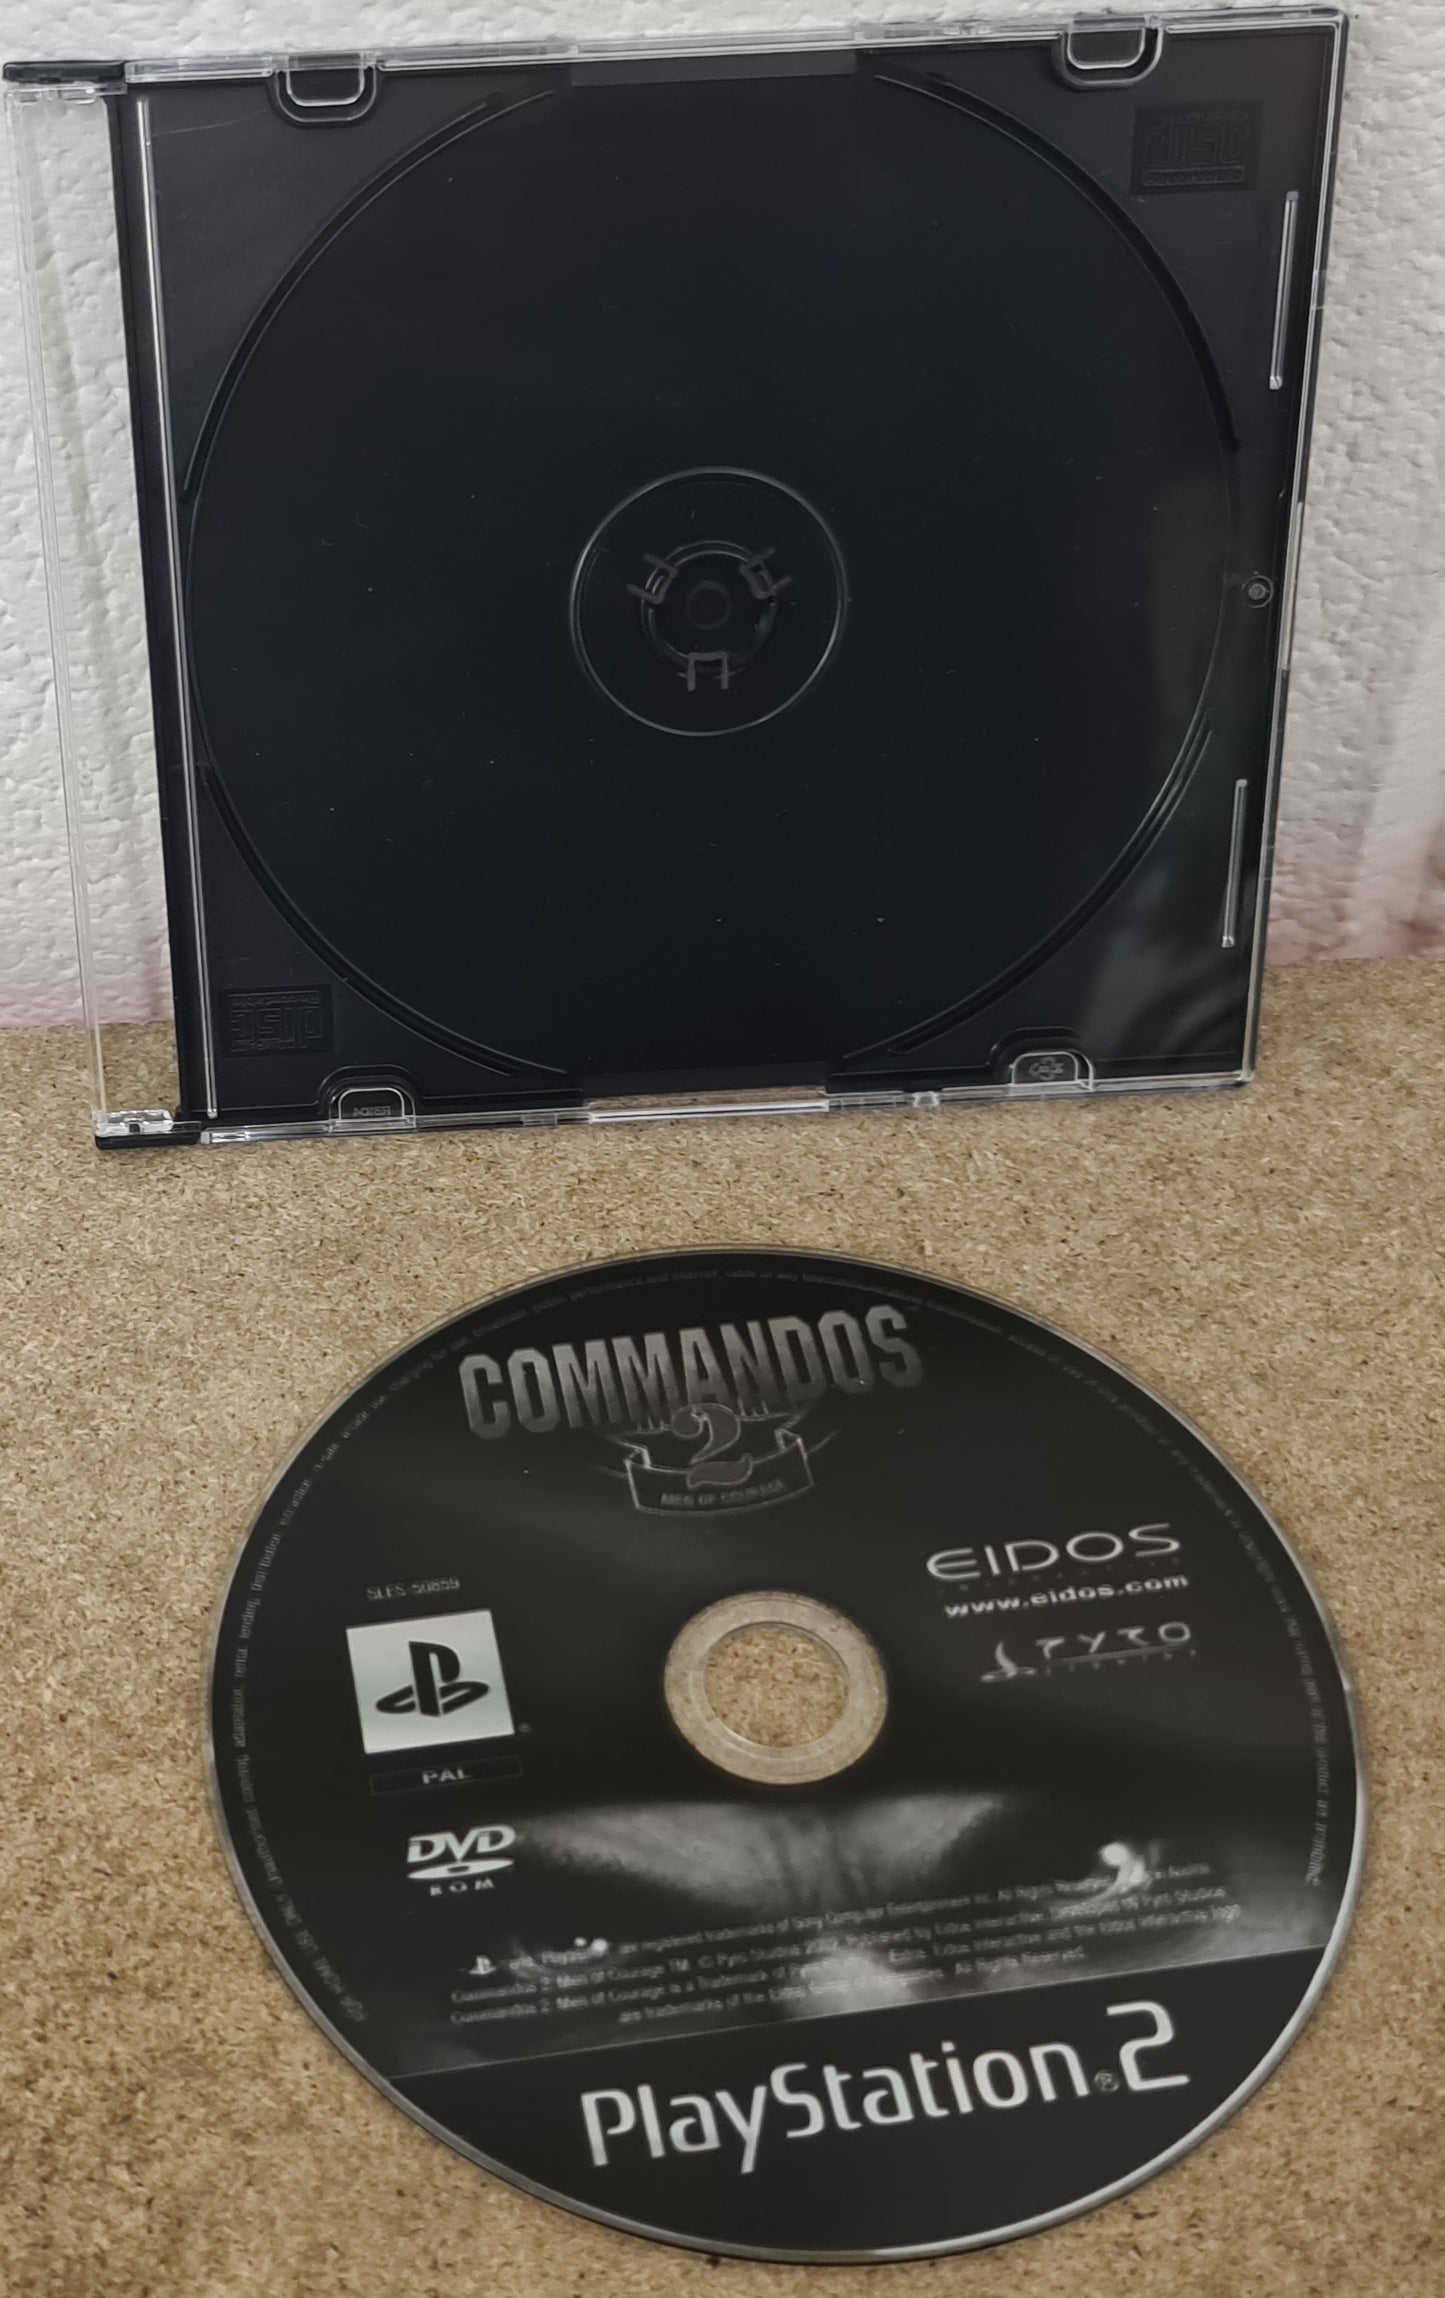 Commandos 2 Men of Courage Sony Playstation 2 (PS2) Game Disc Only